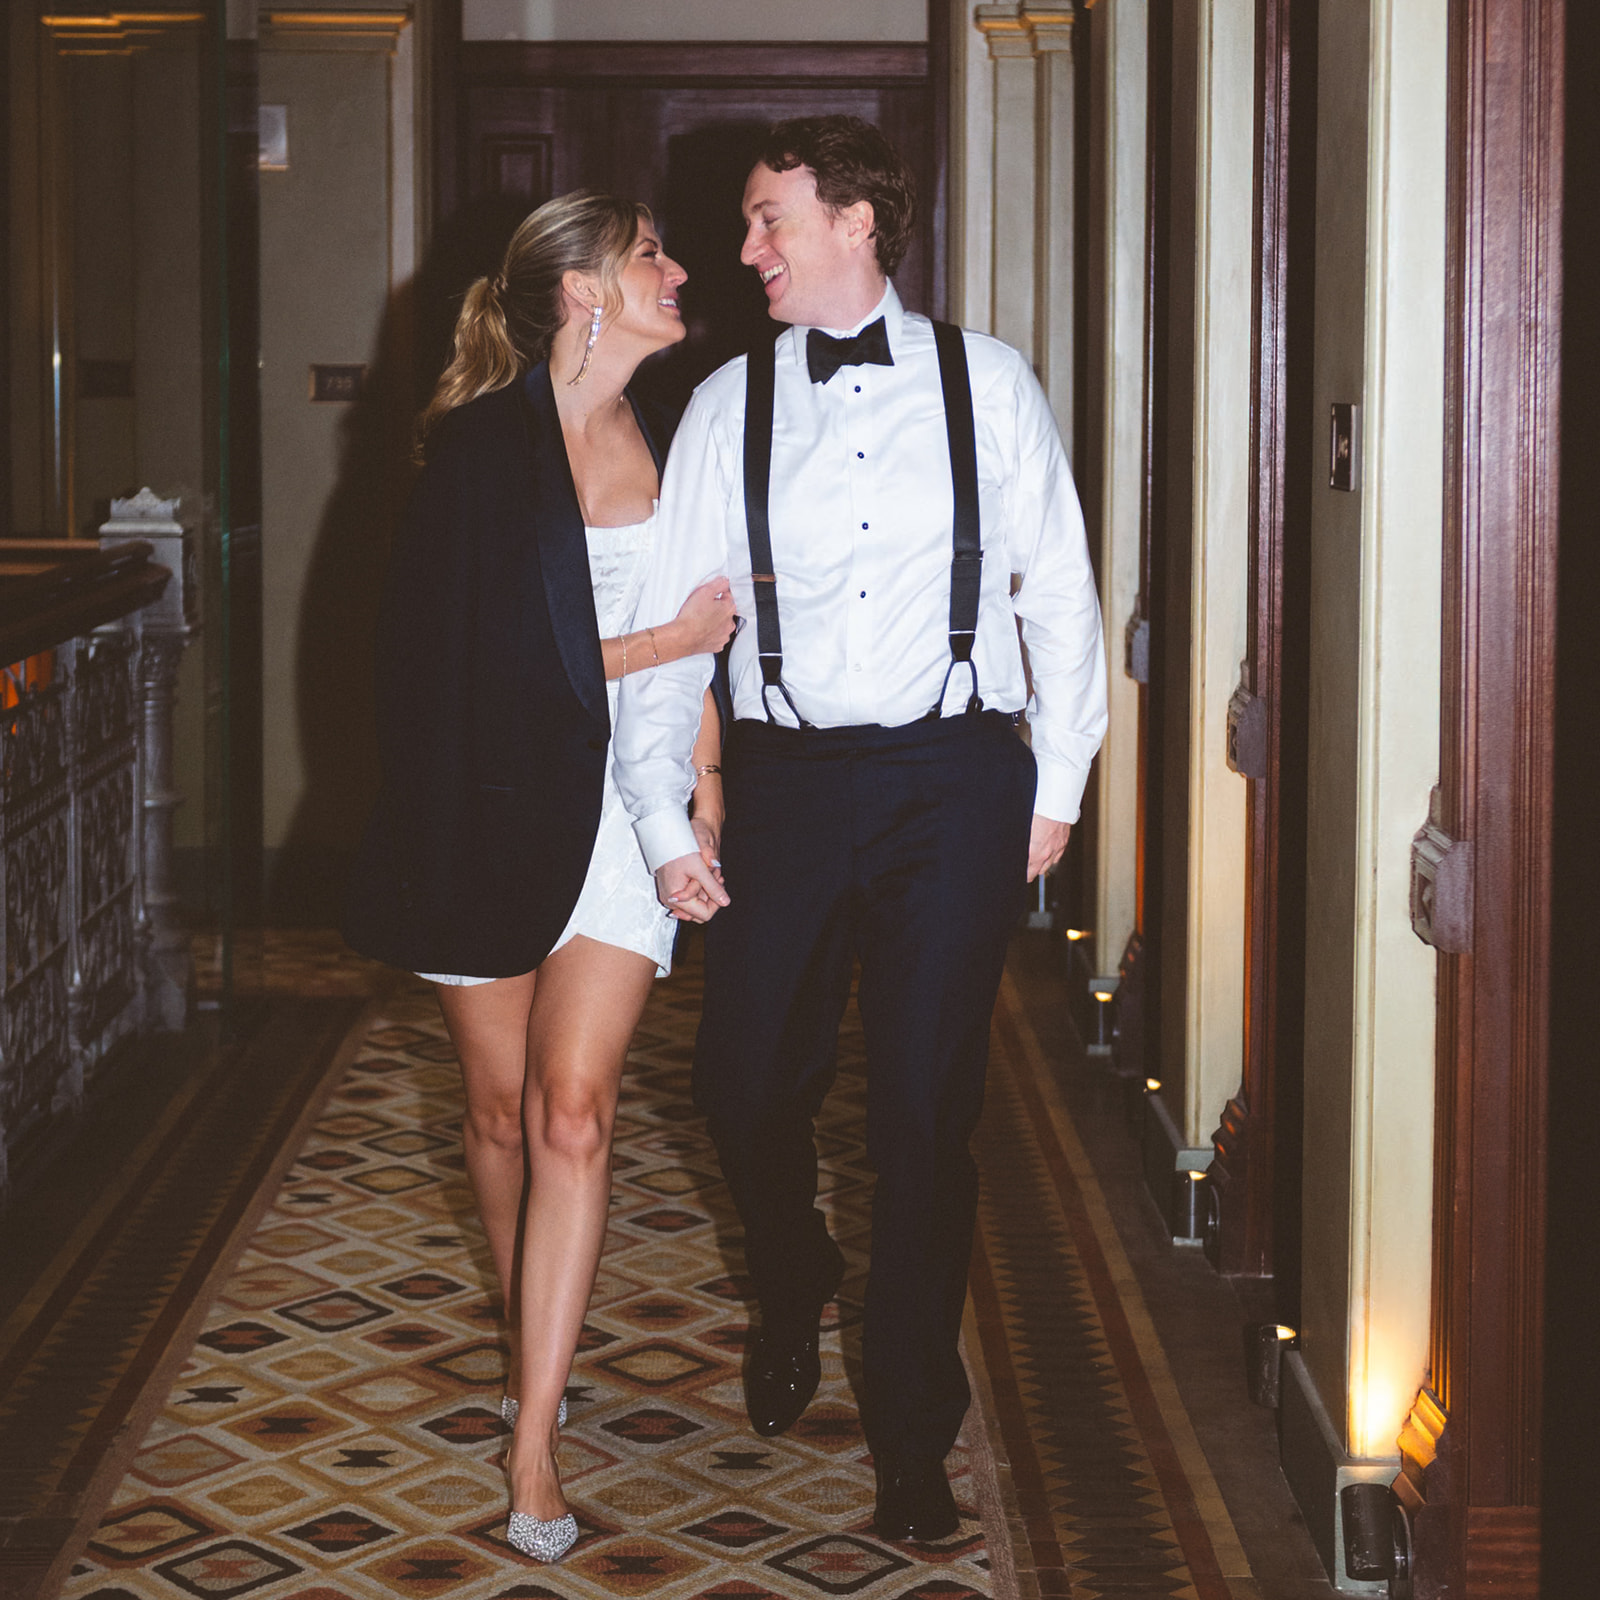 stylish black tie engagement photos at the Gramercy Hotel in NYC